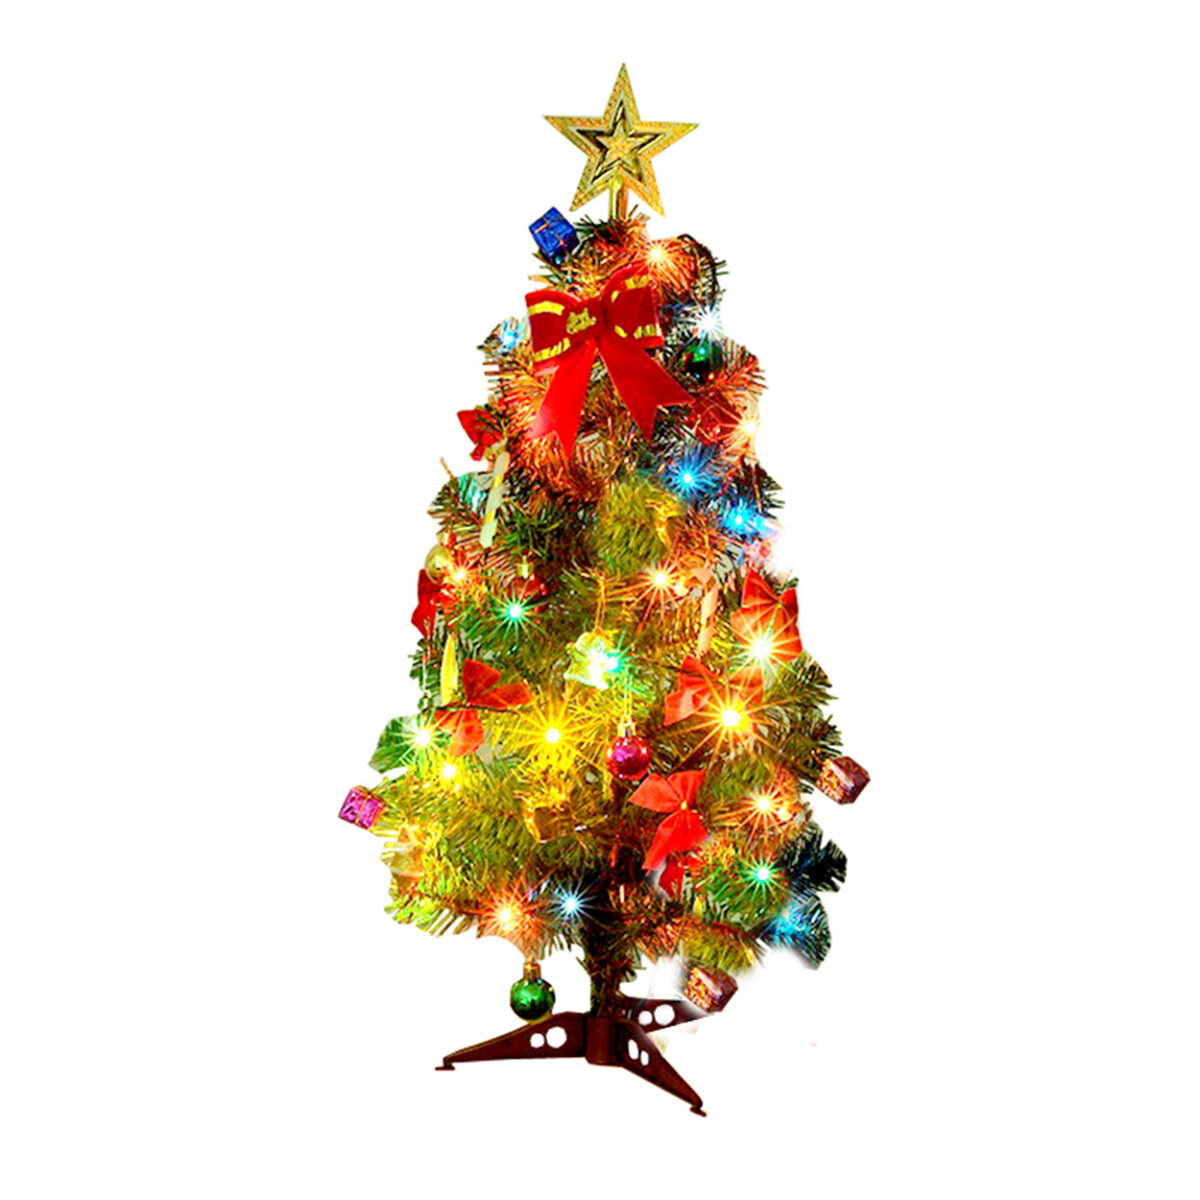 30cm/45cm/60cm Height Tabletop Xmas Tree Artificial Mini Christmas Pine Tree with Led String Light Ornaments Home Decora